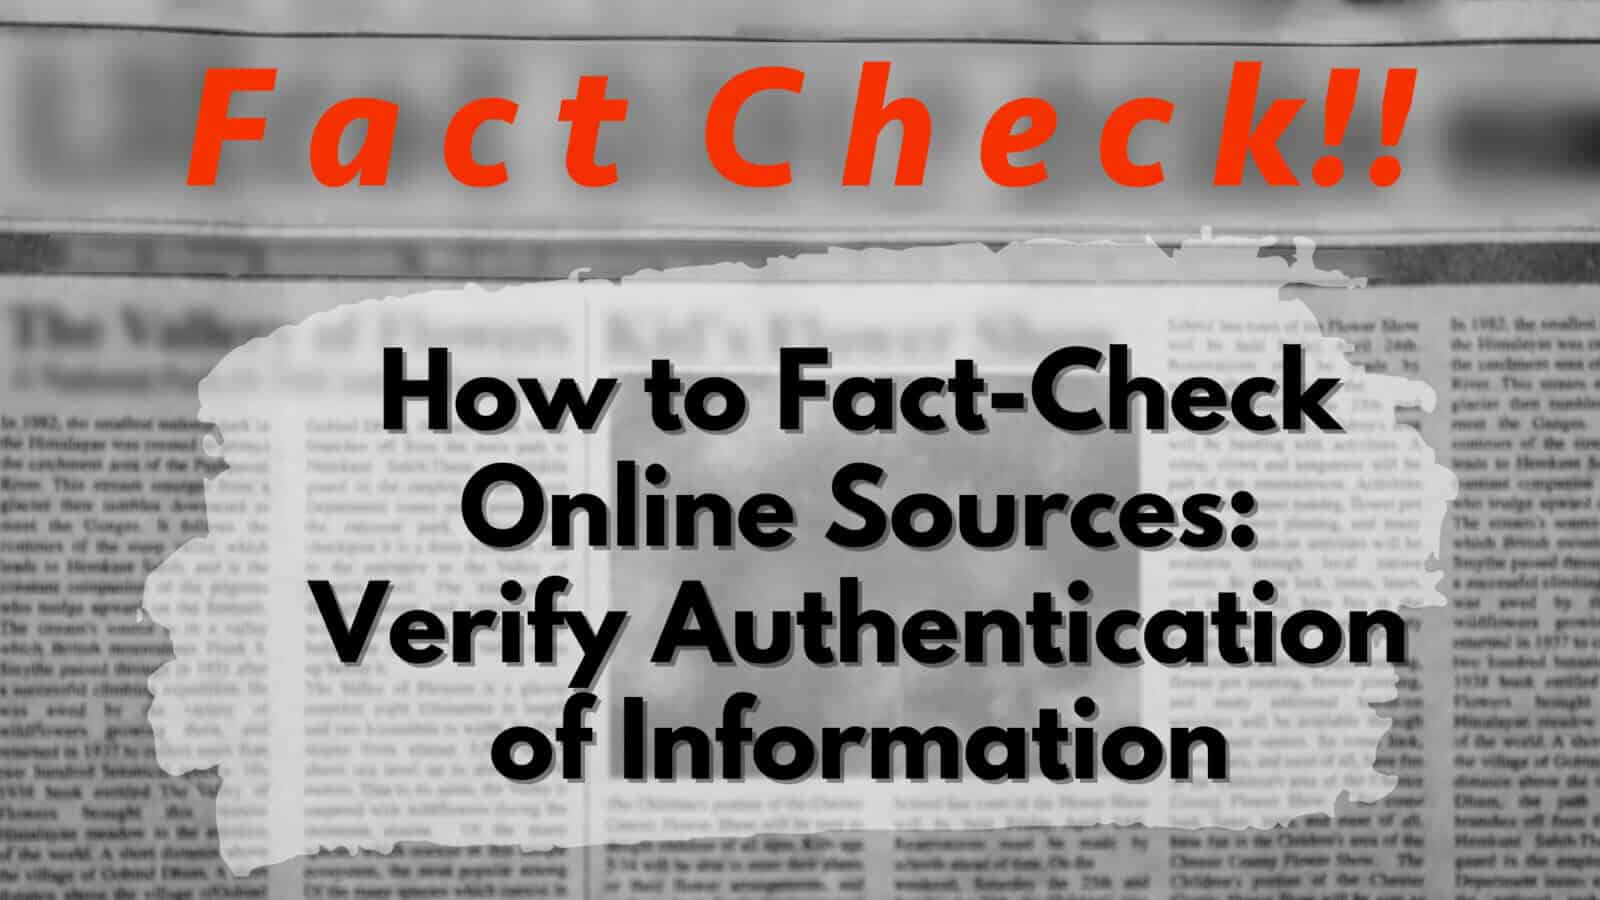 How to verify the authenticity of information from online sources through fact-checking.